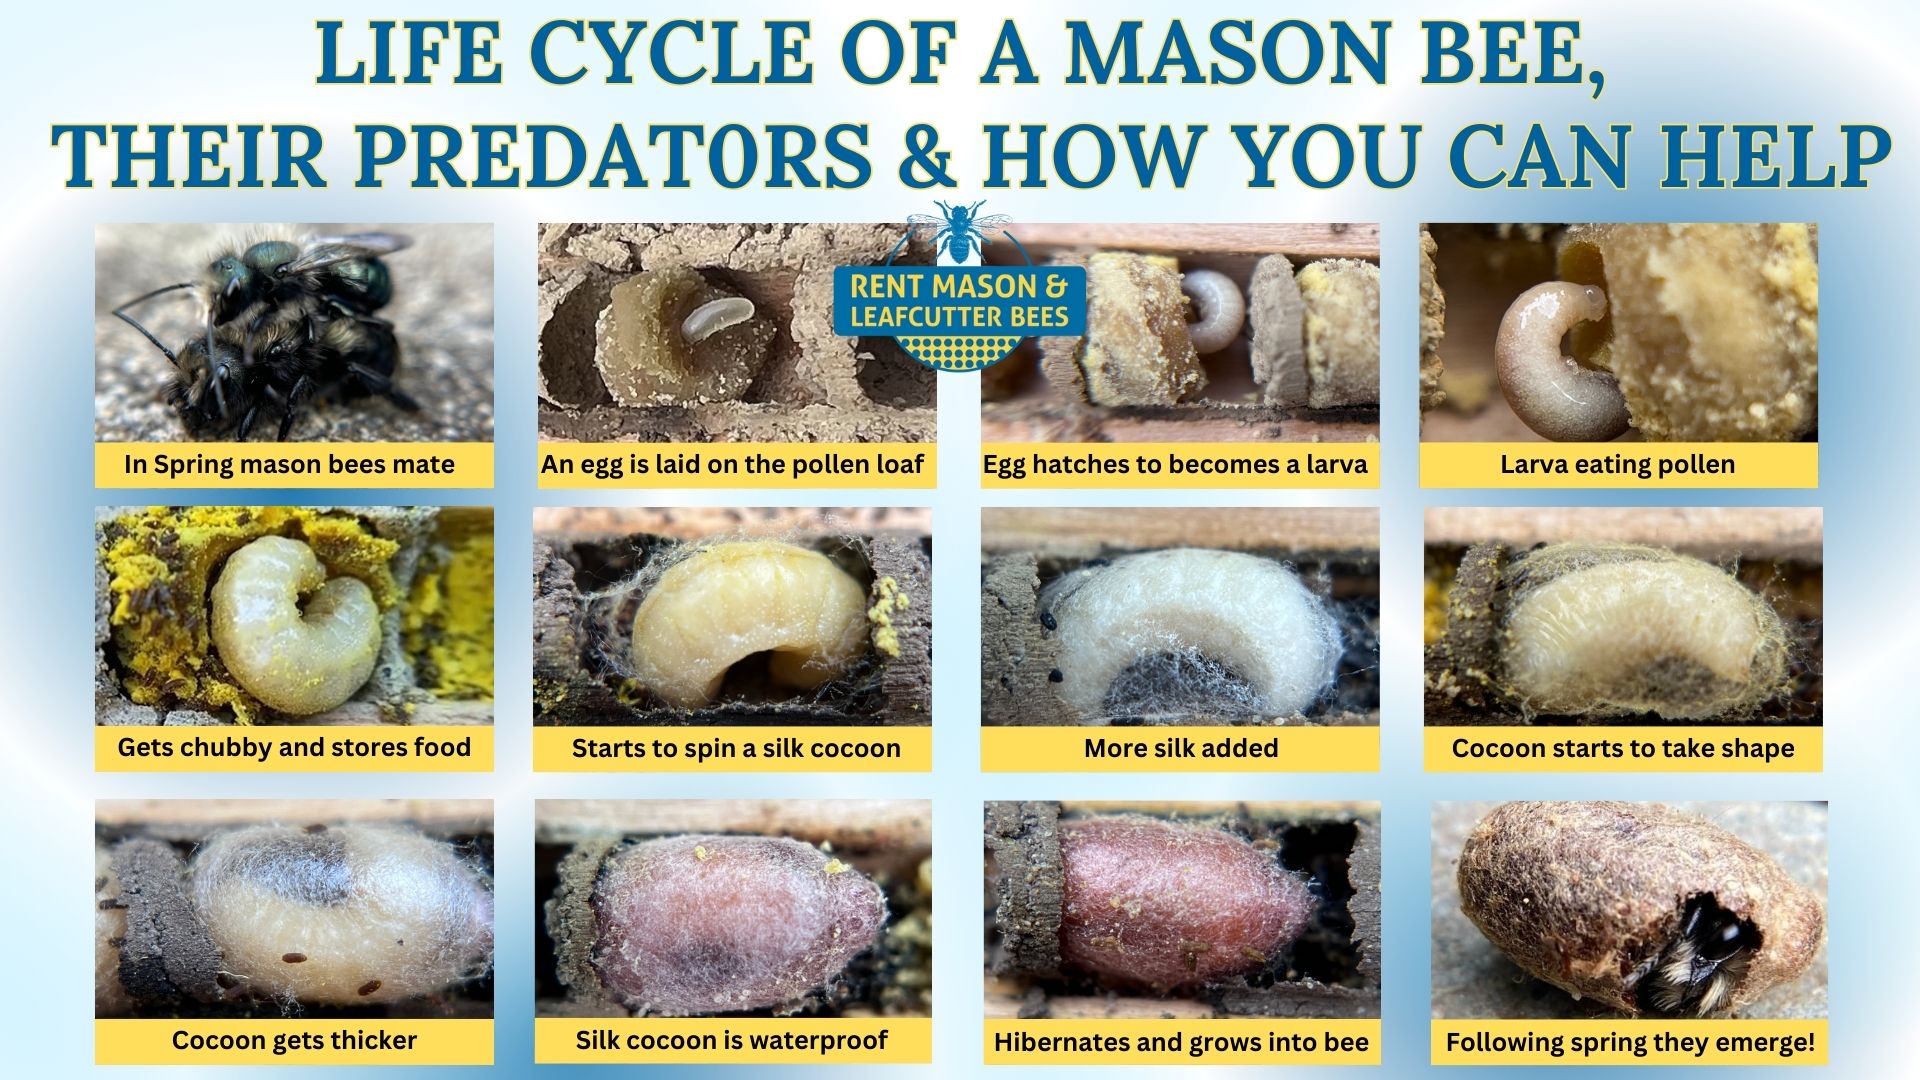 Play Video: We utilized a macro lens to capture and share the intricate details of the Mason Bee's life cycle with you.